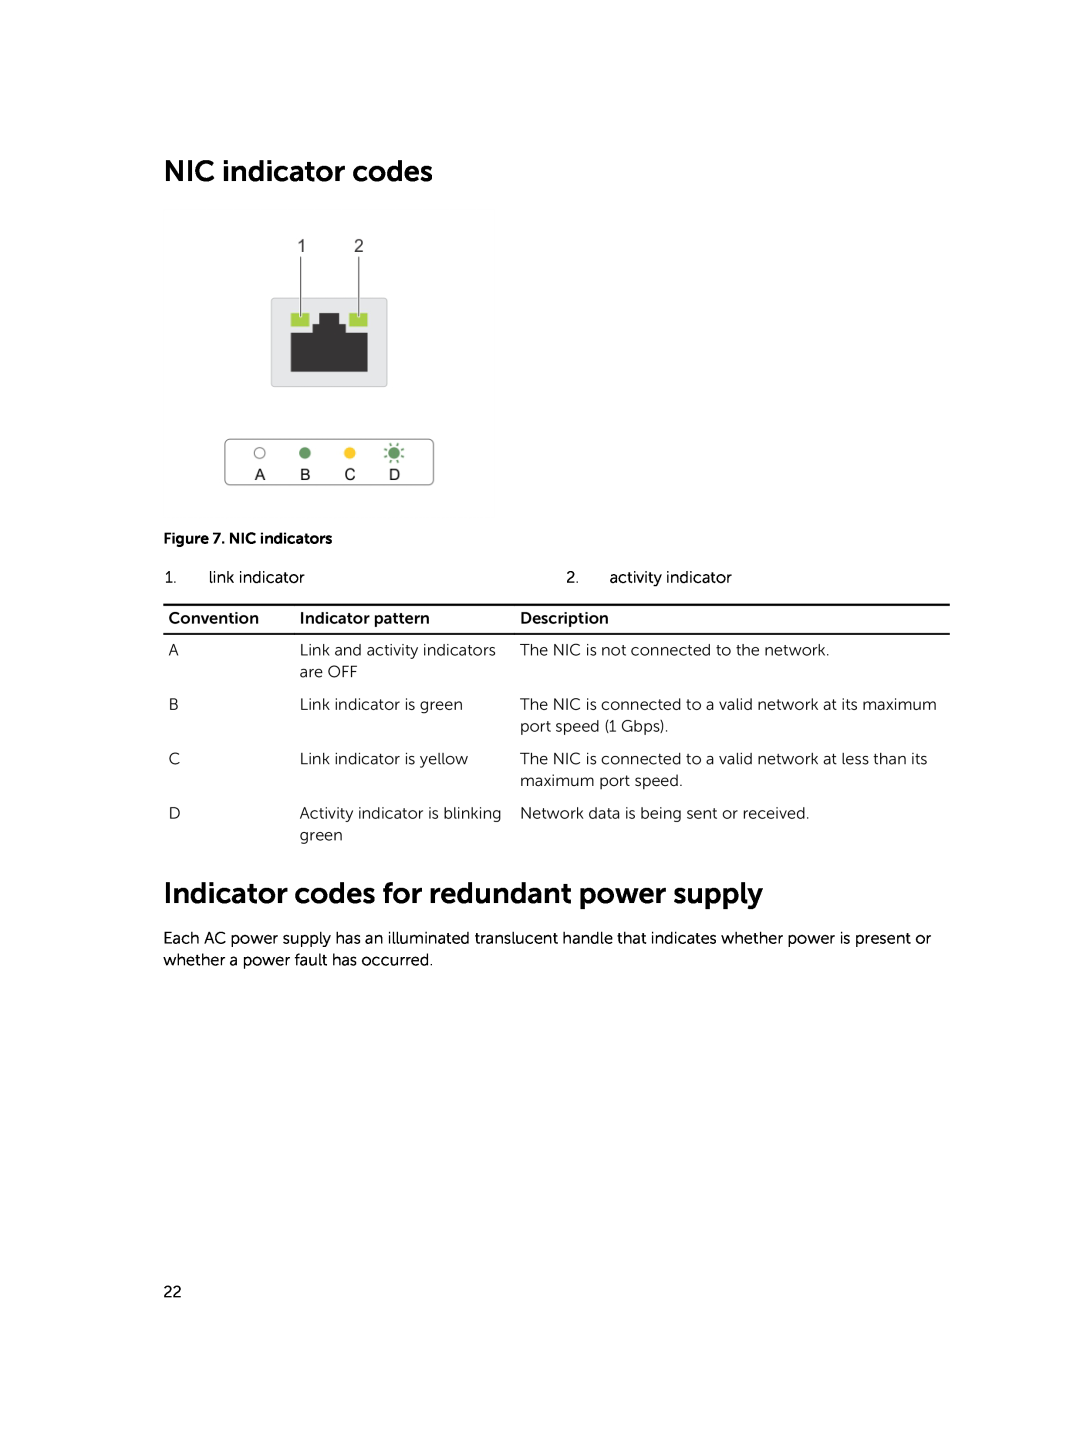 Dell E30S owner manual NIC indicator codes, Indicator codes for redundant power supply, NIC indicators 